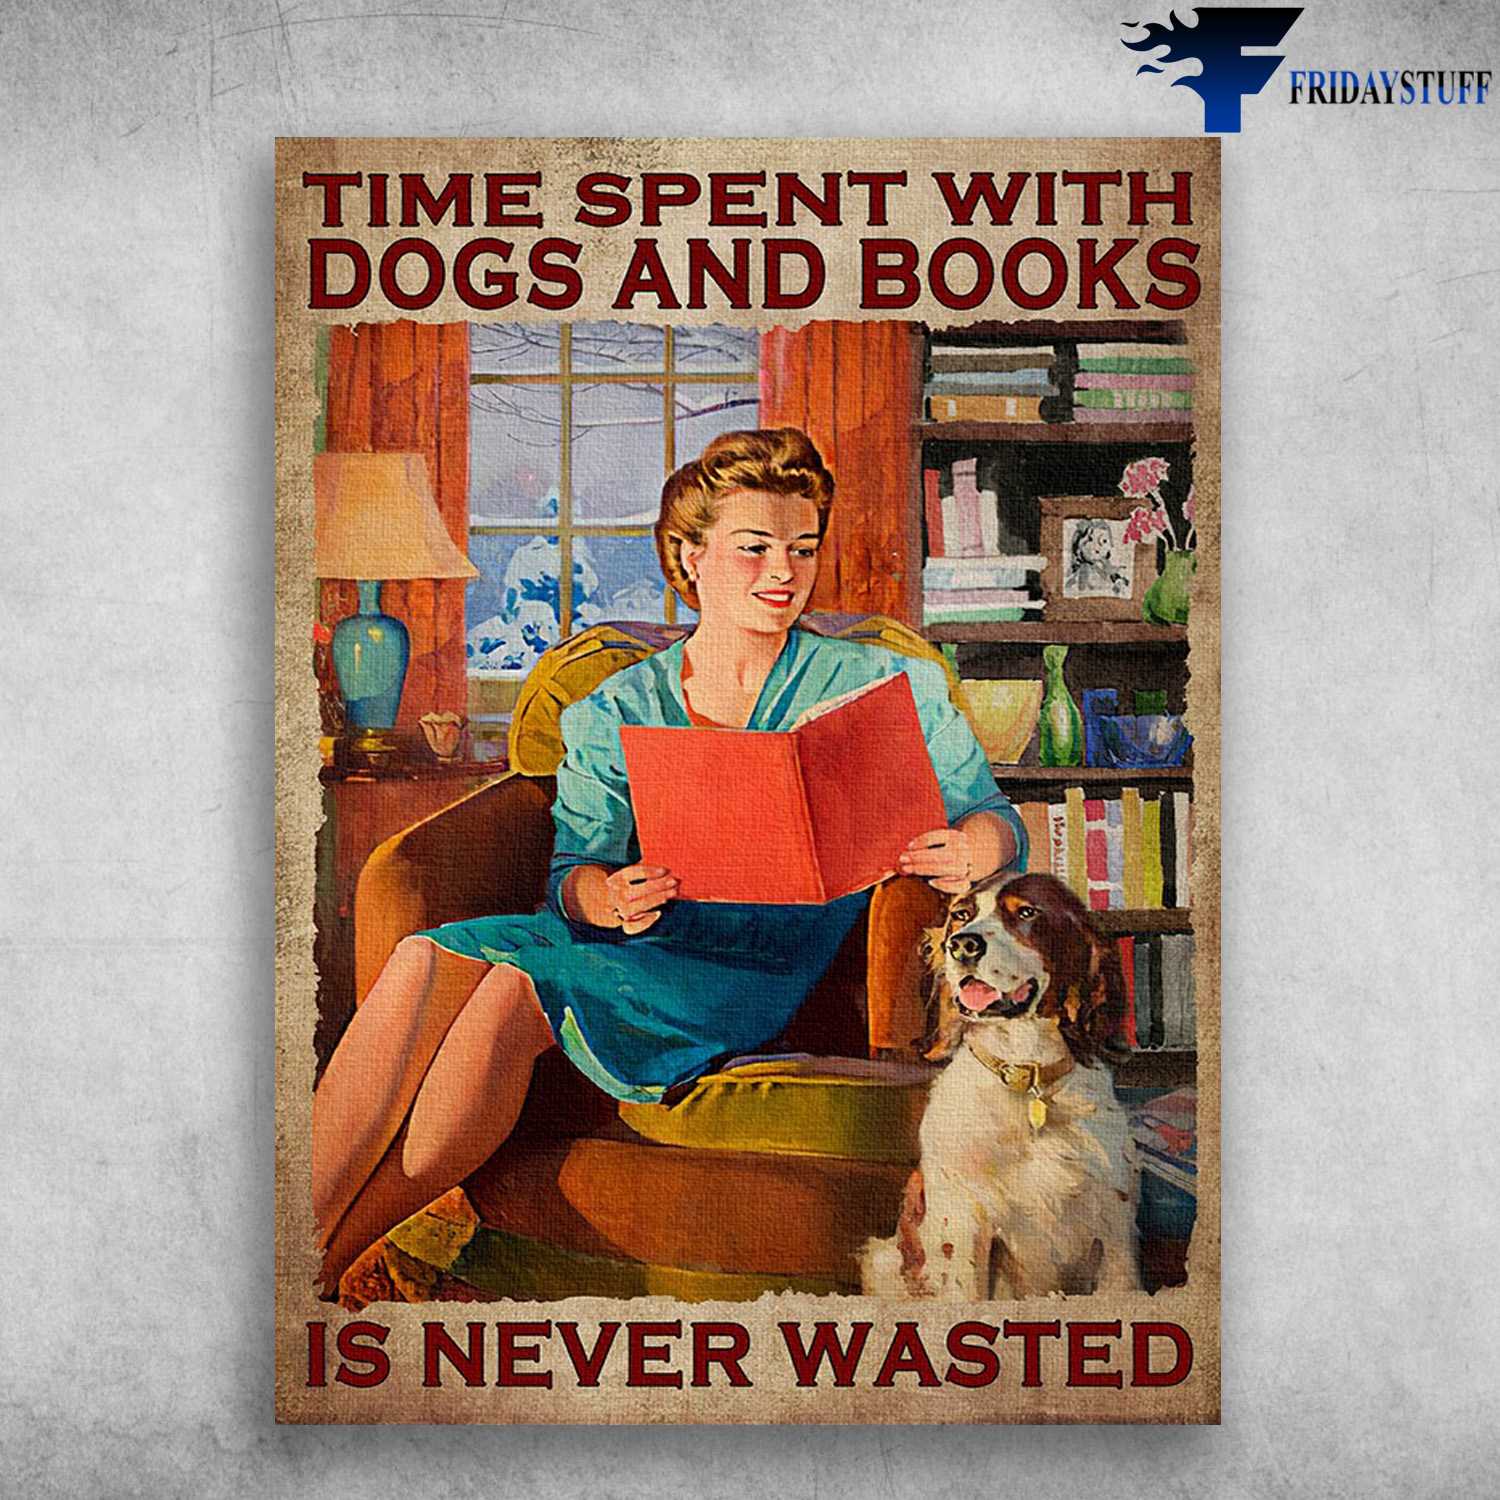 Book Reading, Dog Lover - Time Spent With, Dog And Books, Is Never Wasted